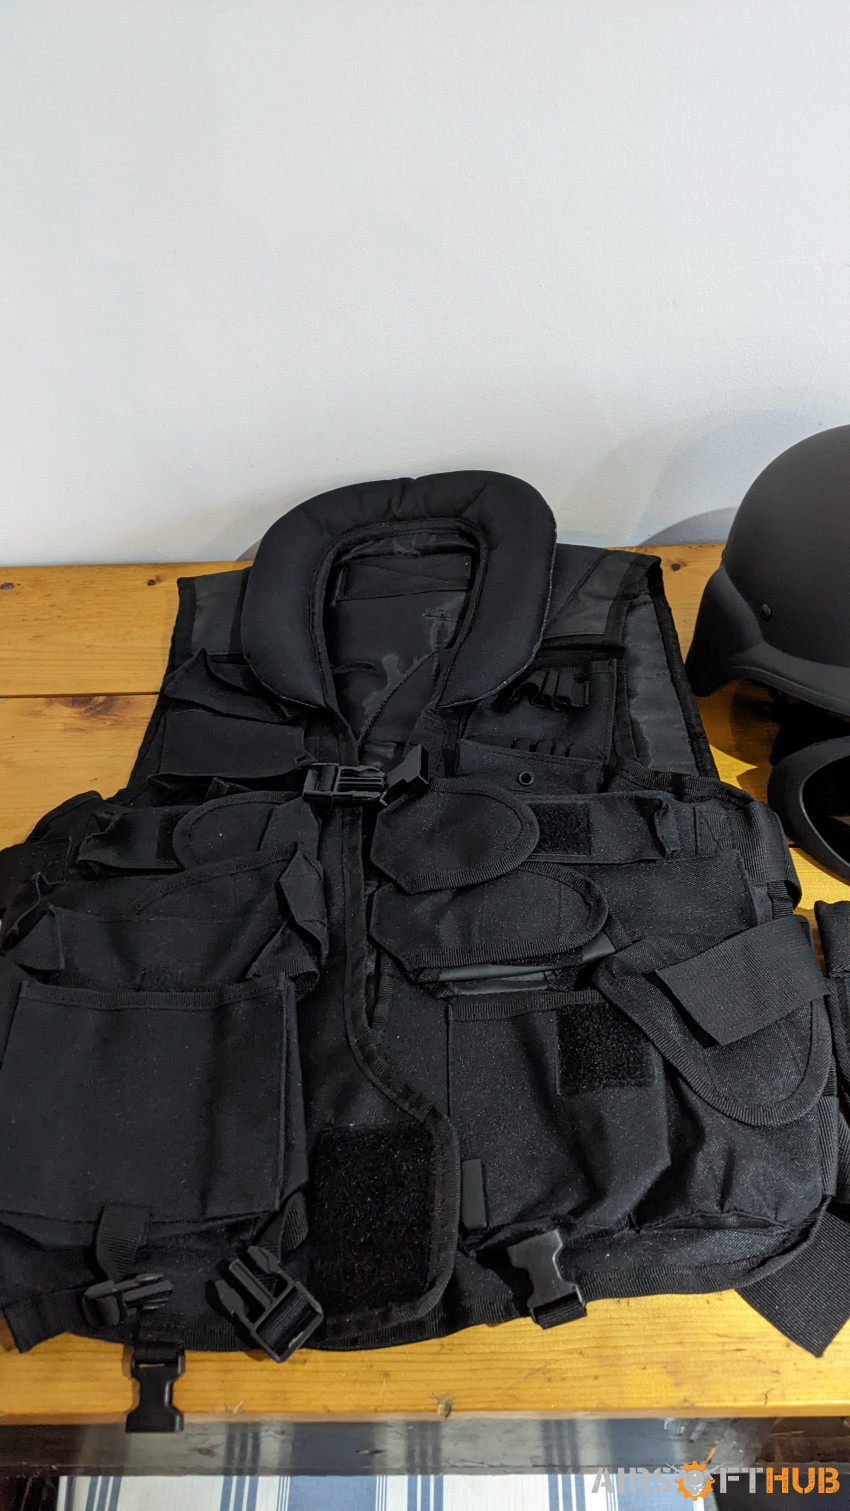 Tactical SWAT Kit Viper brand - Used airsoft equipment